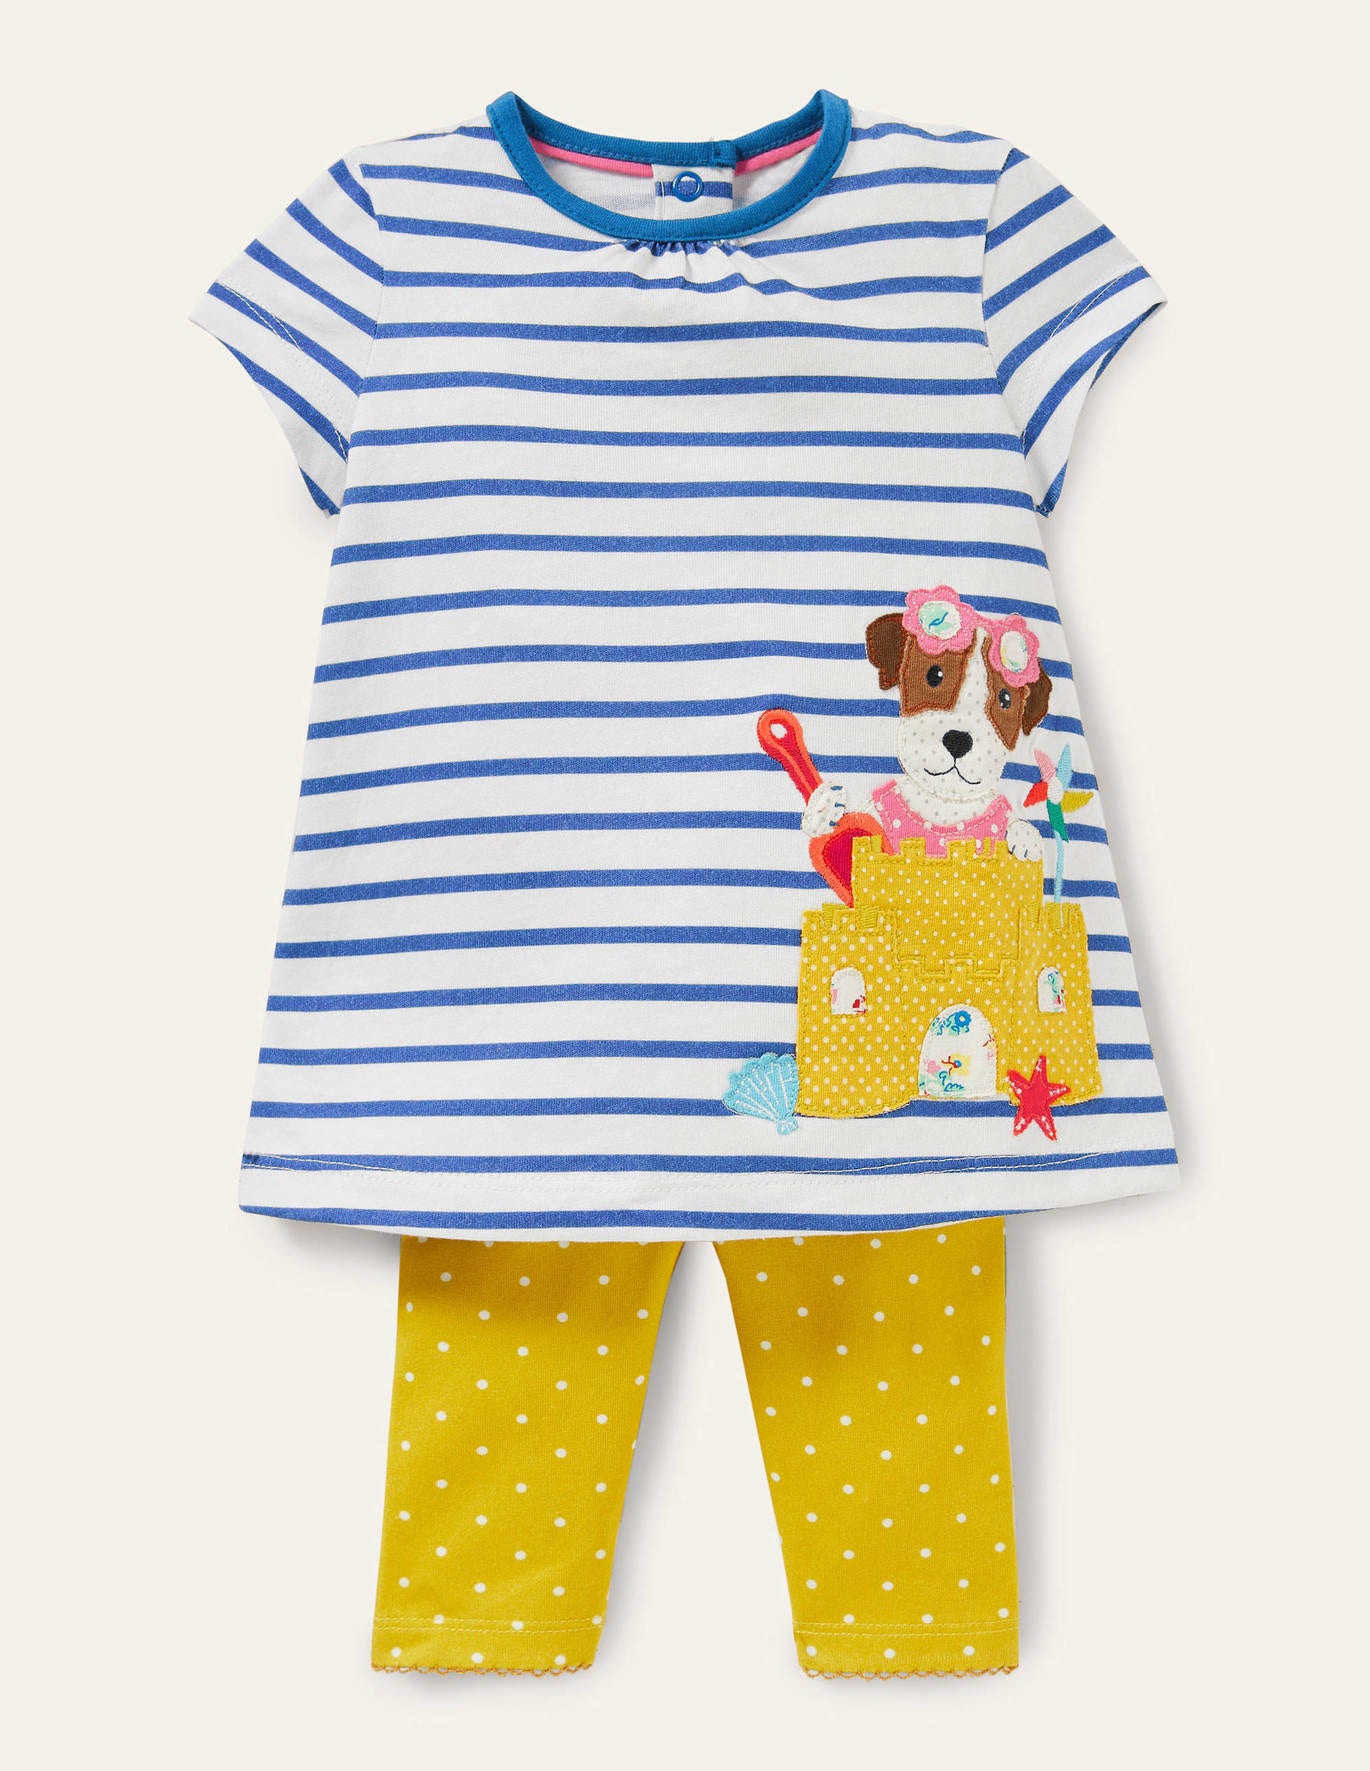 Boden Dress and Leggings Playset - Ivory/Blue Sprout Sandcastle